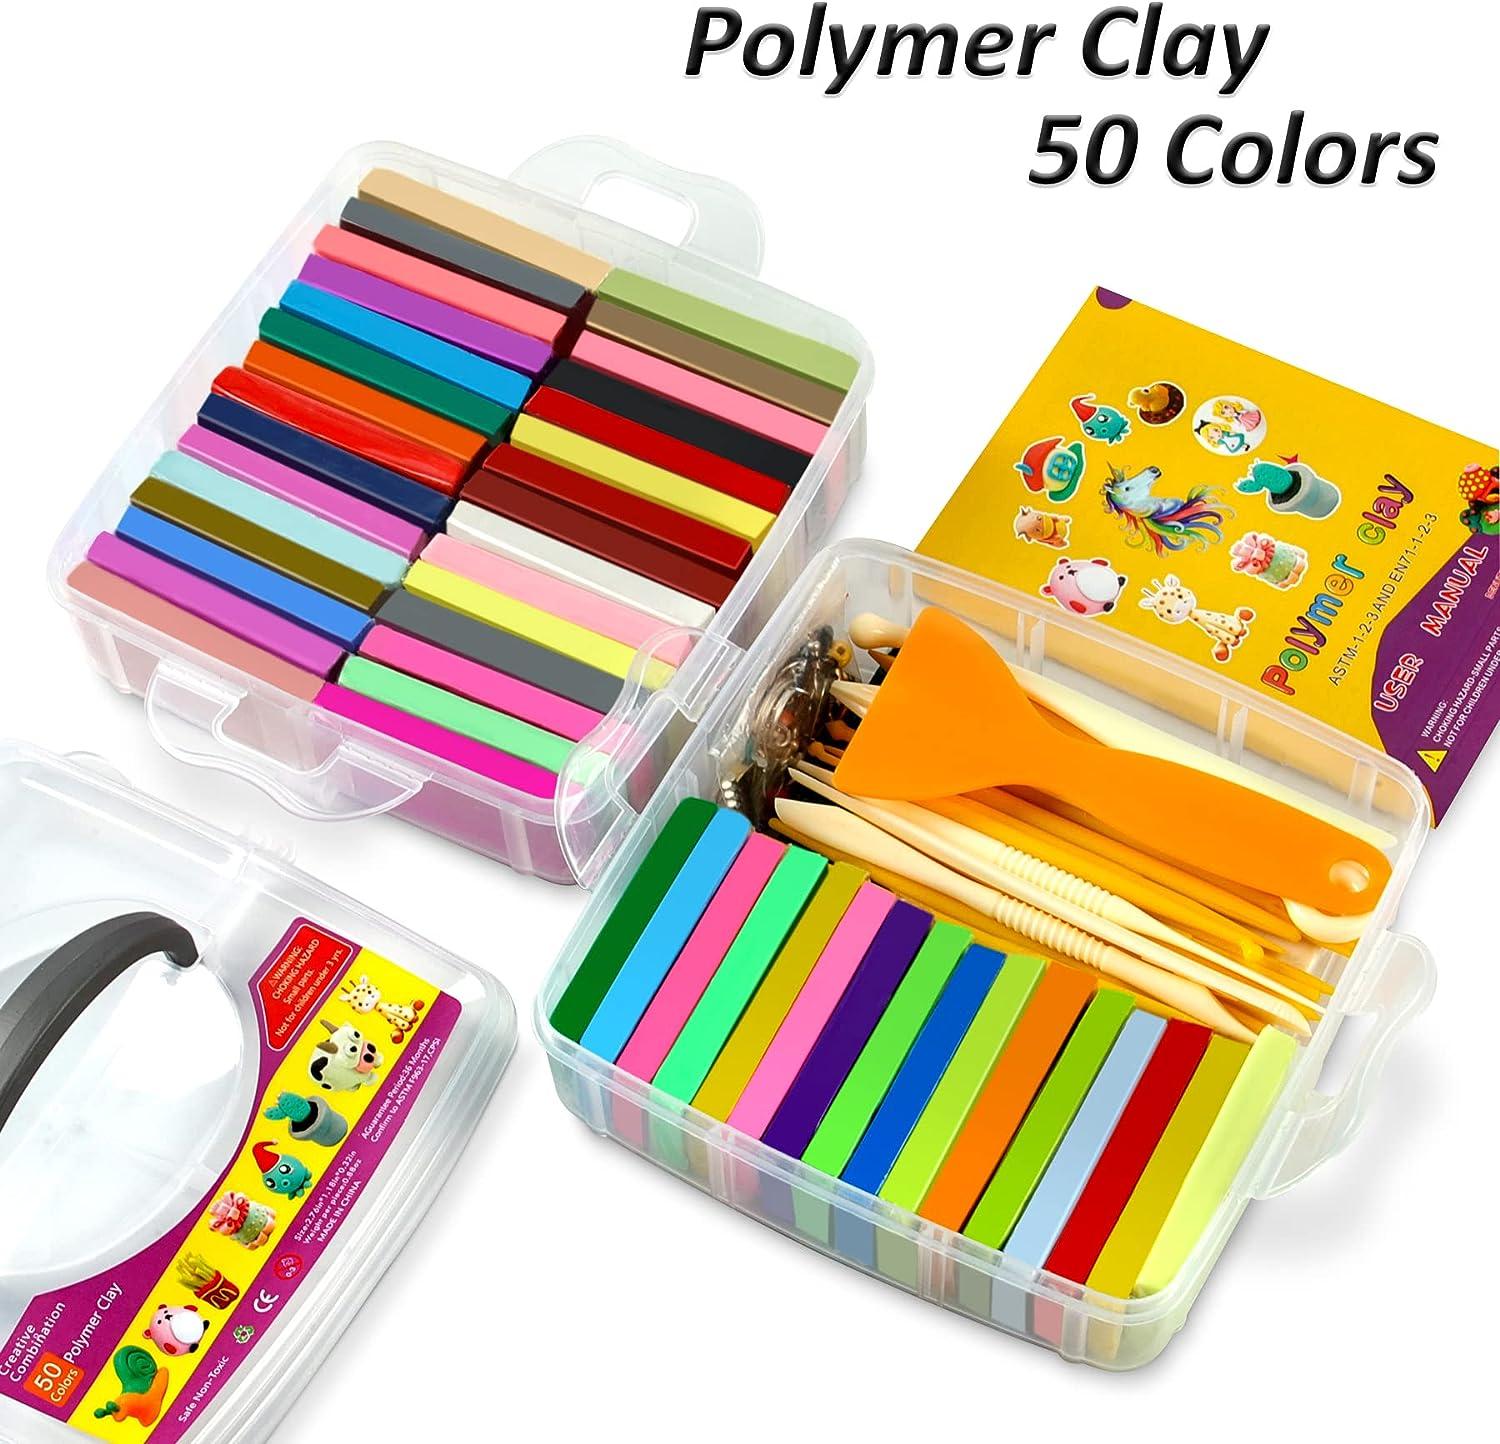 50 Colors Polymer Clay Starter Kit Oven Bake Modeling Clay w/ 19 Sculpting  Tools